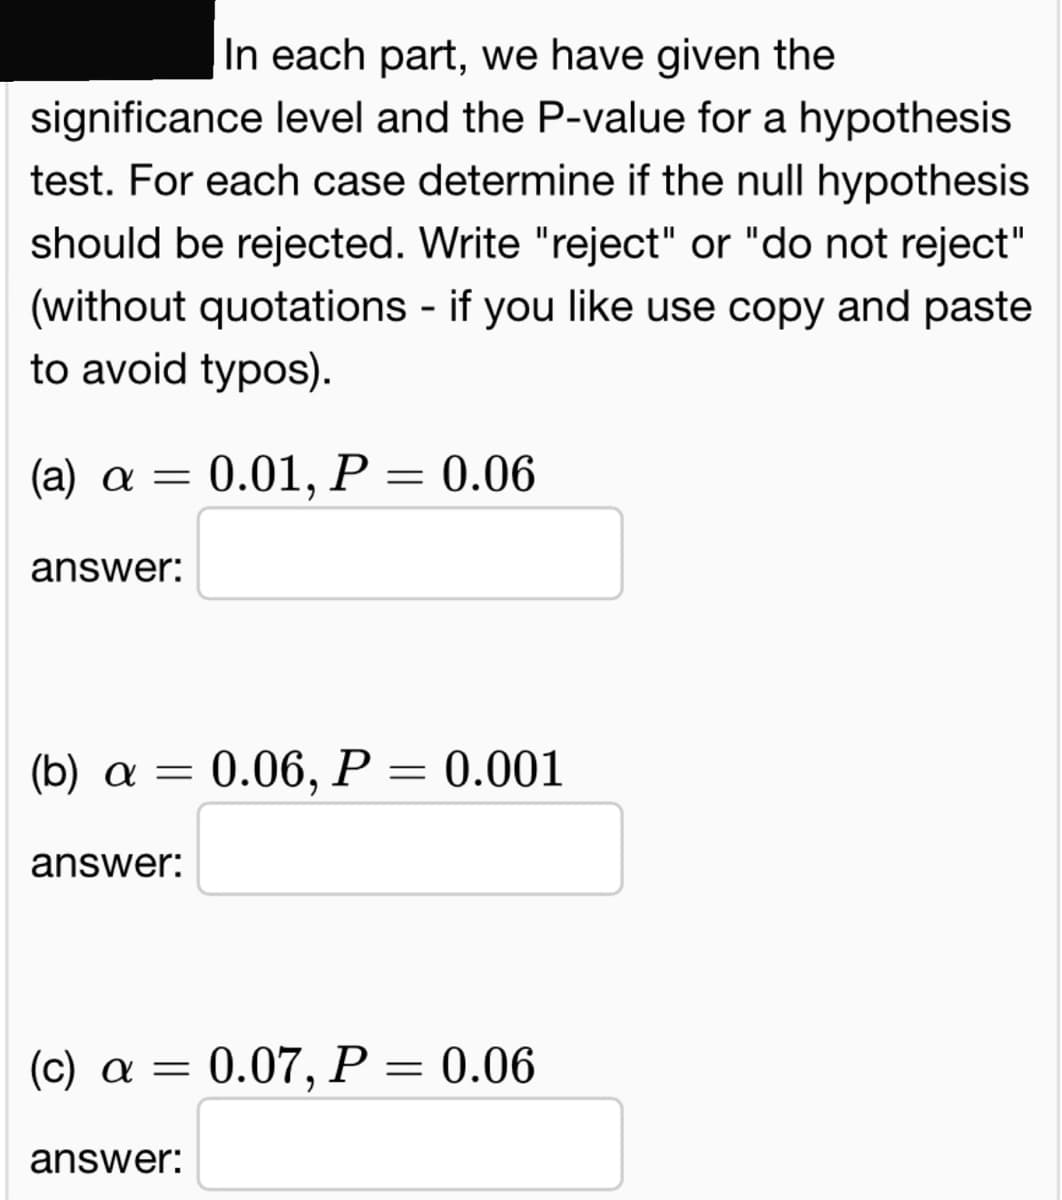 In each part, we have given the
significance level and the P-value for a hypothesis
test. For each case determine if the null hypothesis
should be rejected. Write "reject" or "do not reject"
(without quotations - if you like use copy and paste
to avoid typos).
(a) α= 0.01, P = 0.06
answer:
(b) a = 0.06, P = 0.001
answer:
(c) a = 0.07, P = 0.06
answer: